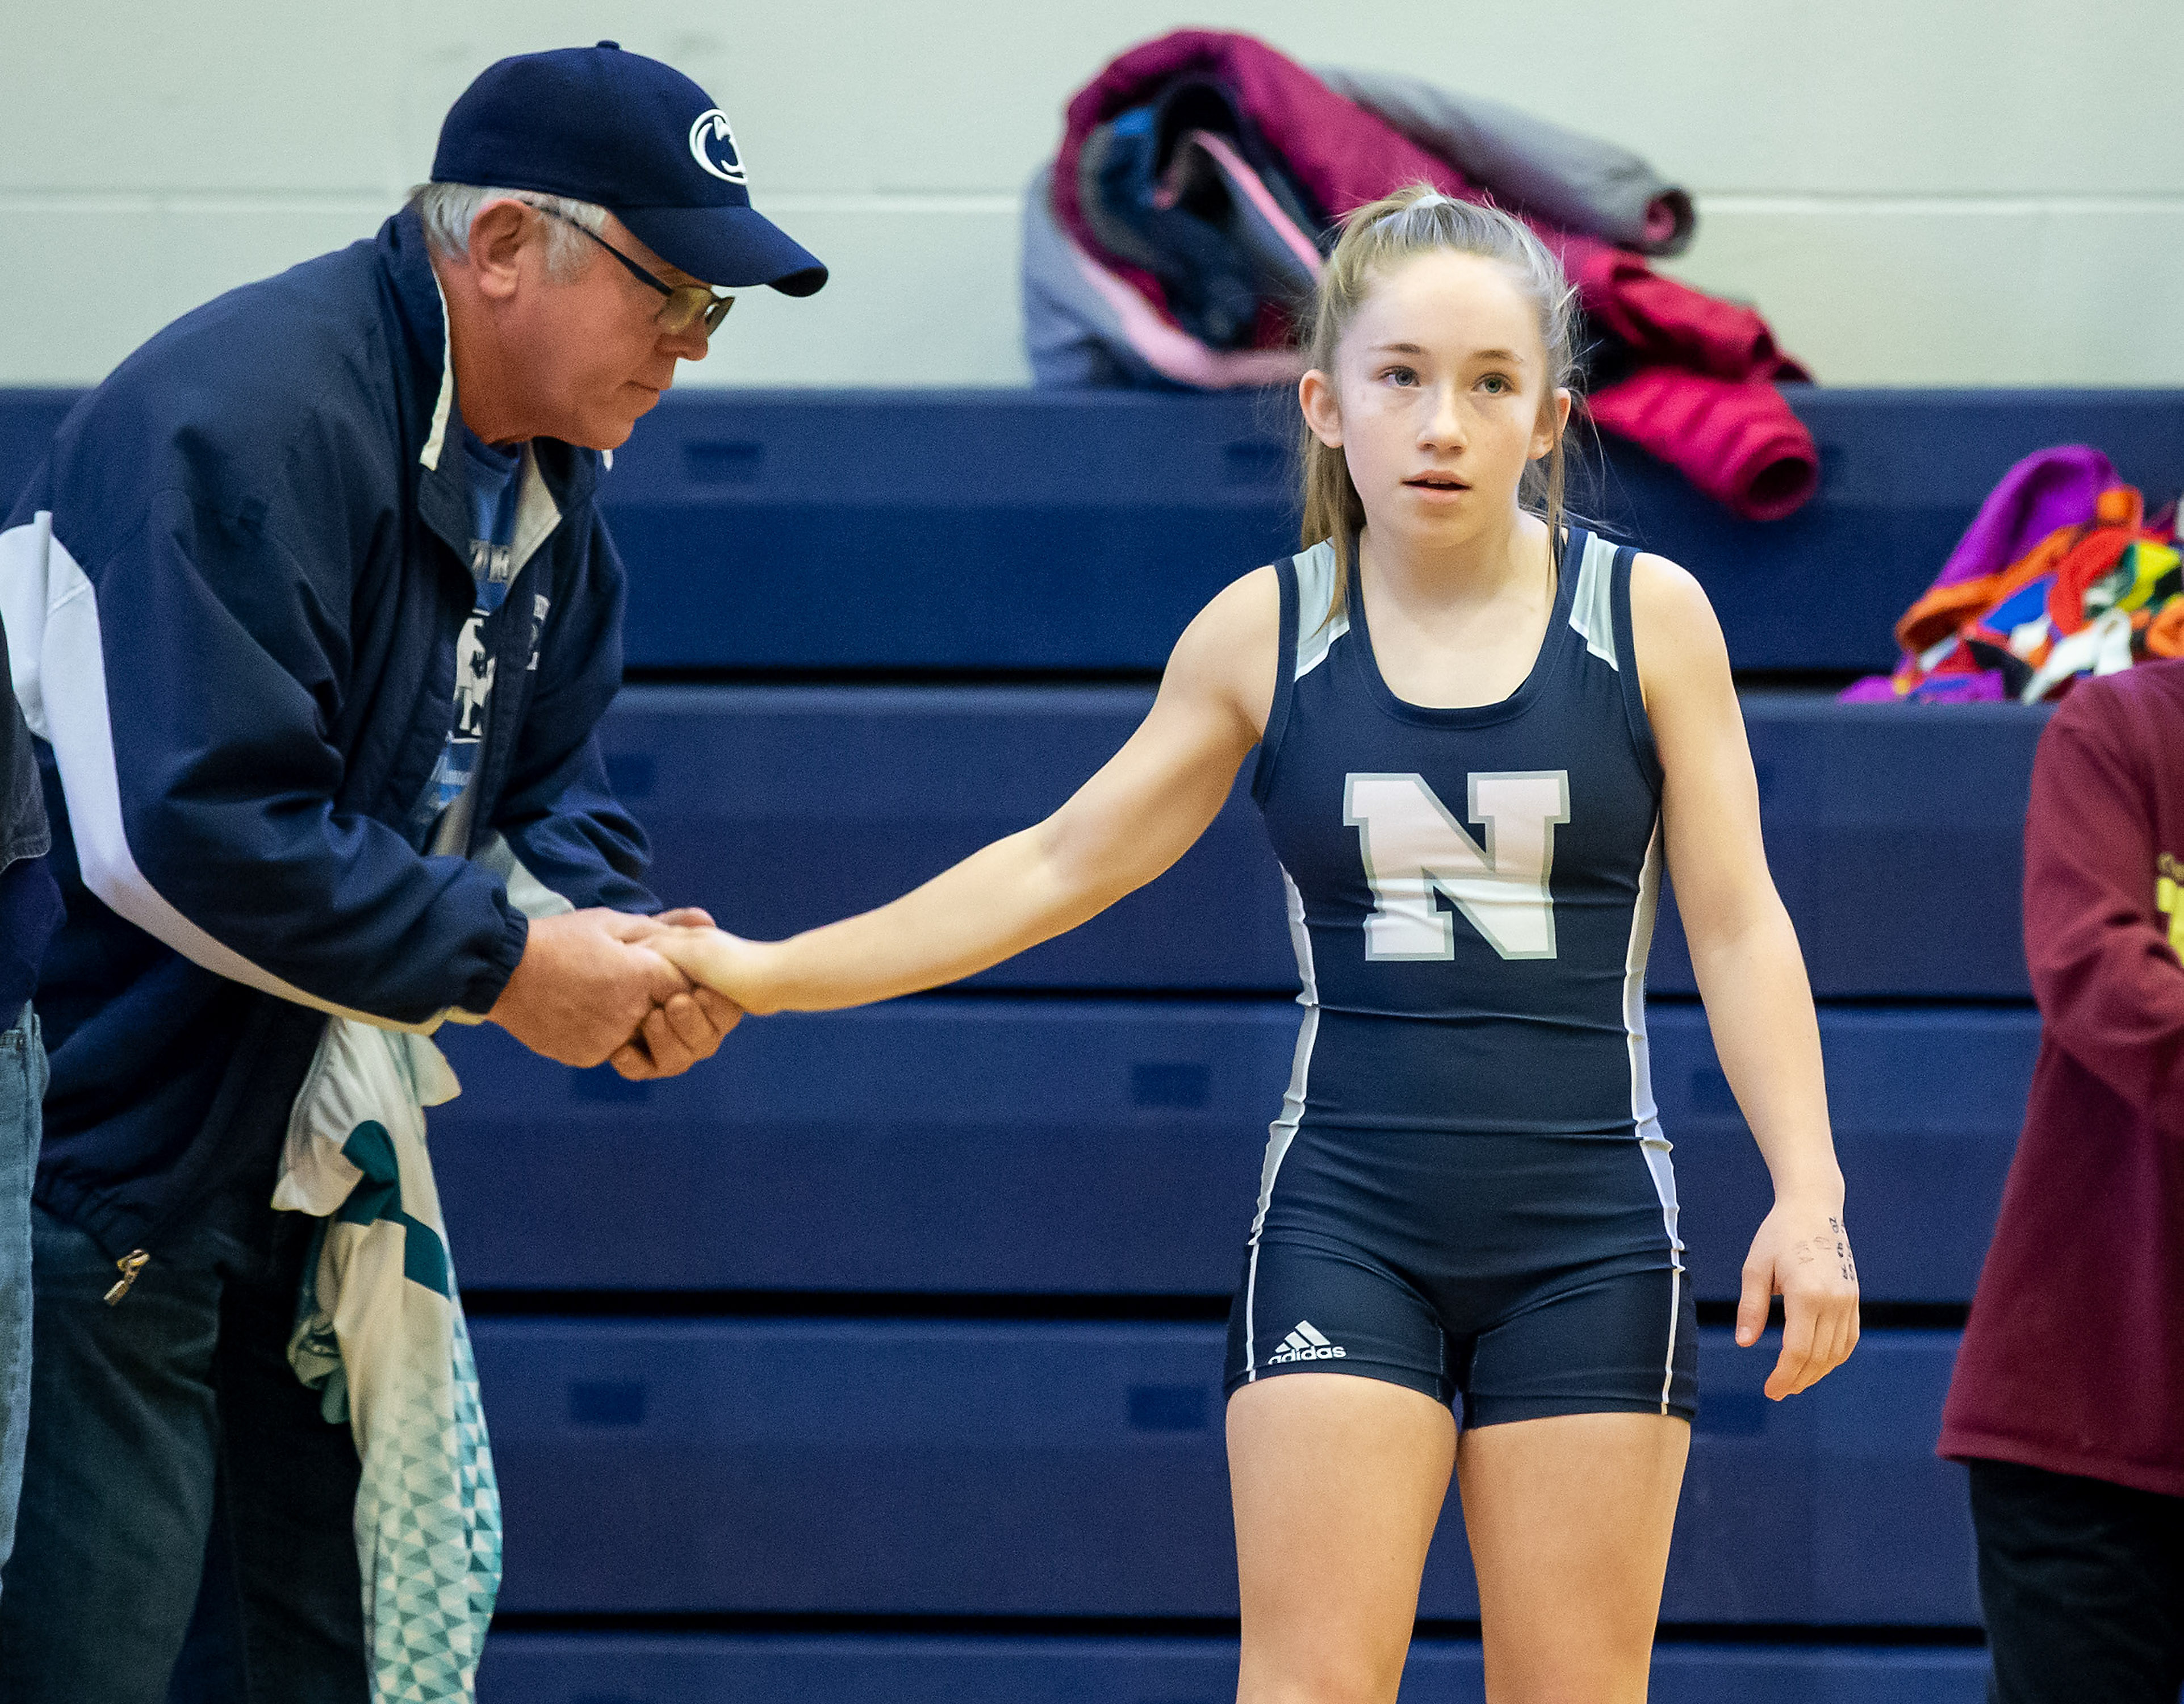 Newport Becomes Pennsylvania S 16th School District To Approve A Girls Wrestling Program Pennlive Com